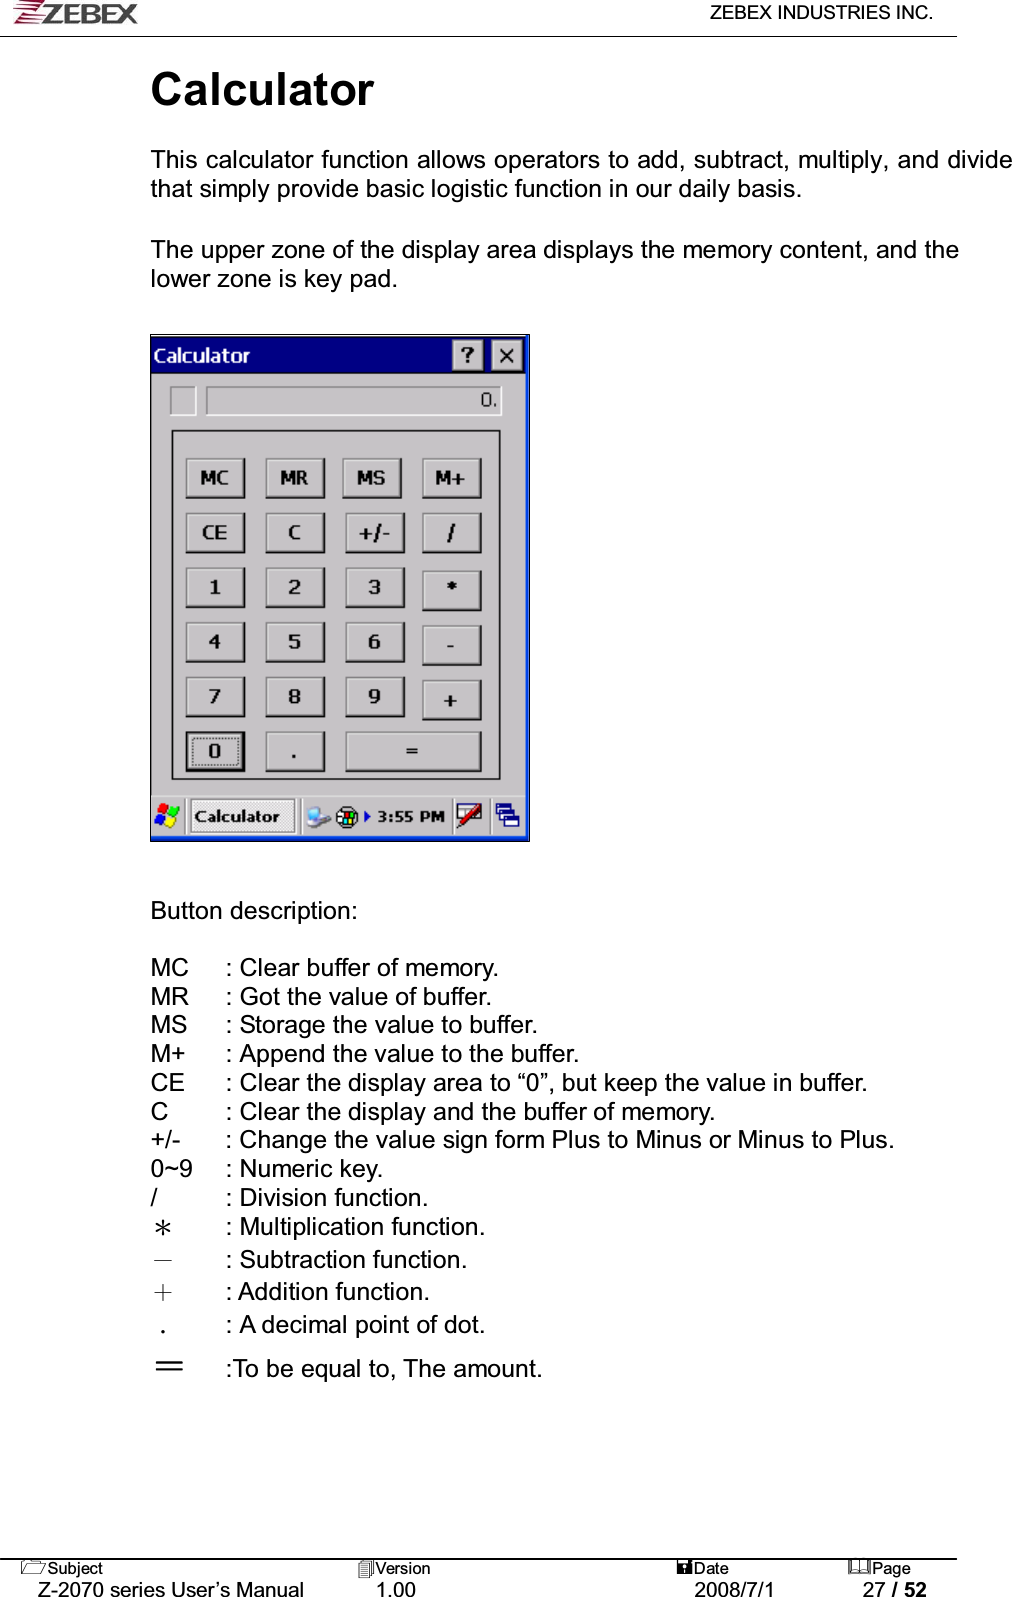   ZEBEX INDUSTRIES INC.   Subject Version  Date Page   Z-2070 series User’s Manual  1.00  2008/7/1  27 / 52 Calculator   This calculator function allows operators to add, subtract, multiply, and divide that simply provide basic logistic function in our daily basis.   !The upper zone of the display area displays the memory content, and the lower zone is key pad.                      Button description:    MC  : Clear buffer of memory. MR  : Got the value of buffer.   MS  : Storage the value to buffer. M+  : Append the value to the buffer. CE  : Clear the display area to “0”, but keep the value in buffer. C  : Clear the display and the buffer of memory. +/-  : Change the value sign form Plus to Minus or Minus to Plus. 0~9 : Numeric key. / : Division function.  Ϡ : Multiplication function. Ё : Subtraction function. Ѐ : Addition function.  ΢  : A decimal point of dot. Ј :To be equal to, The amount.   